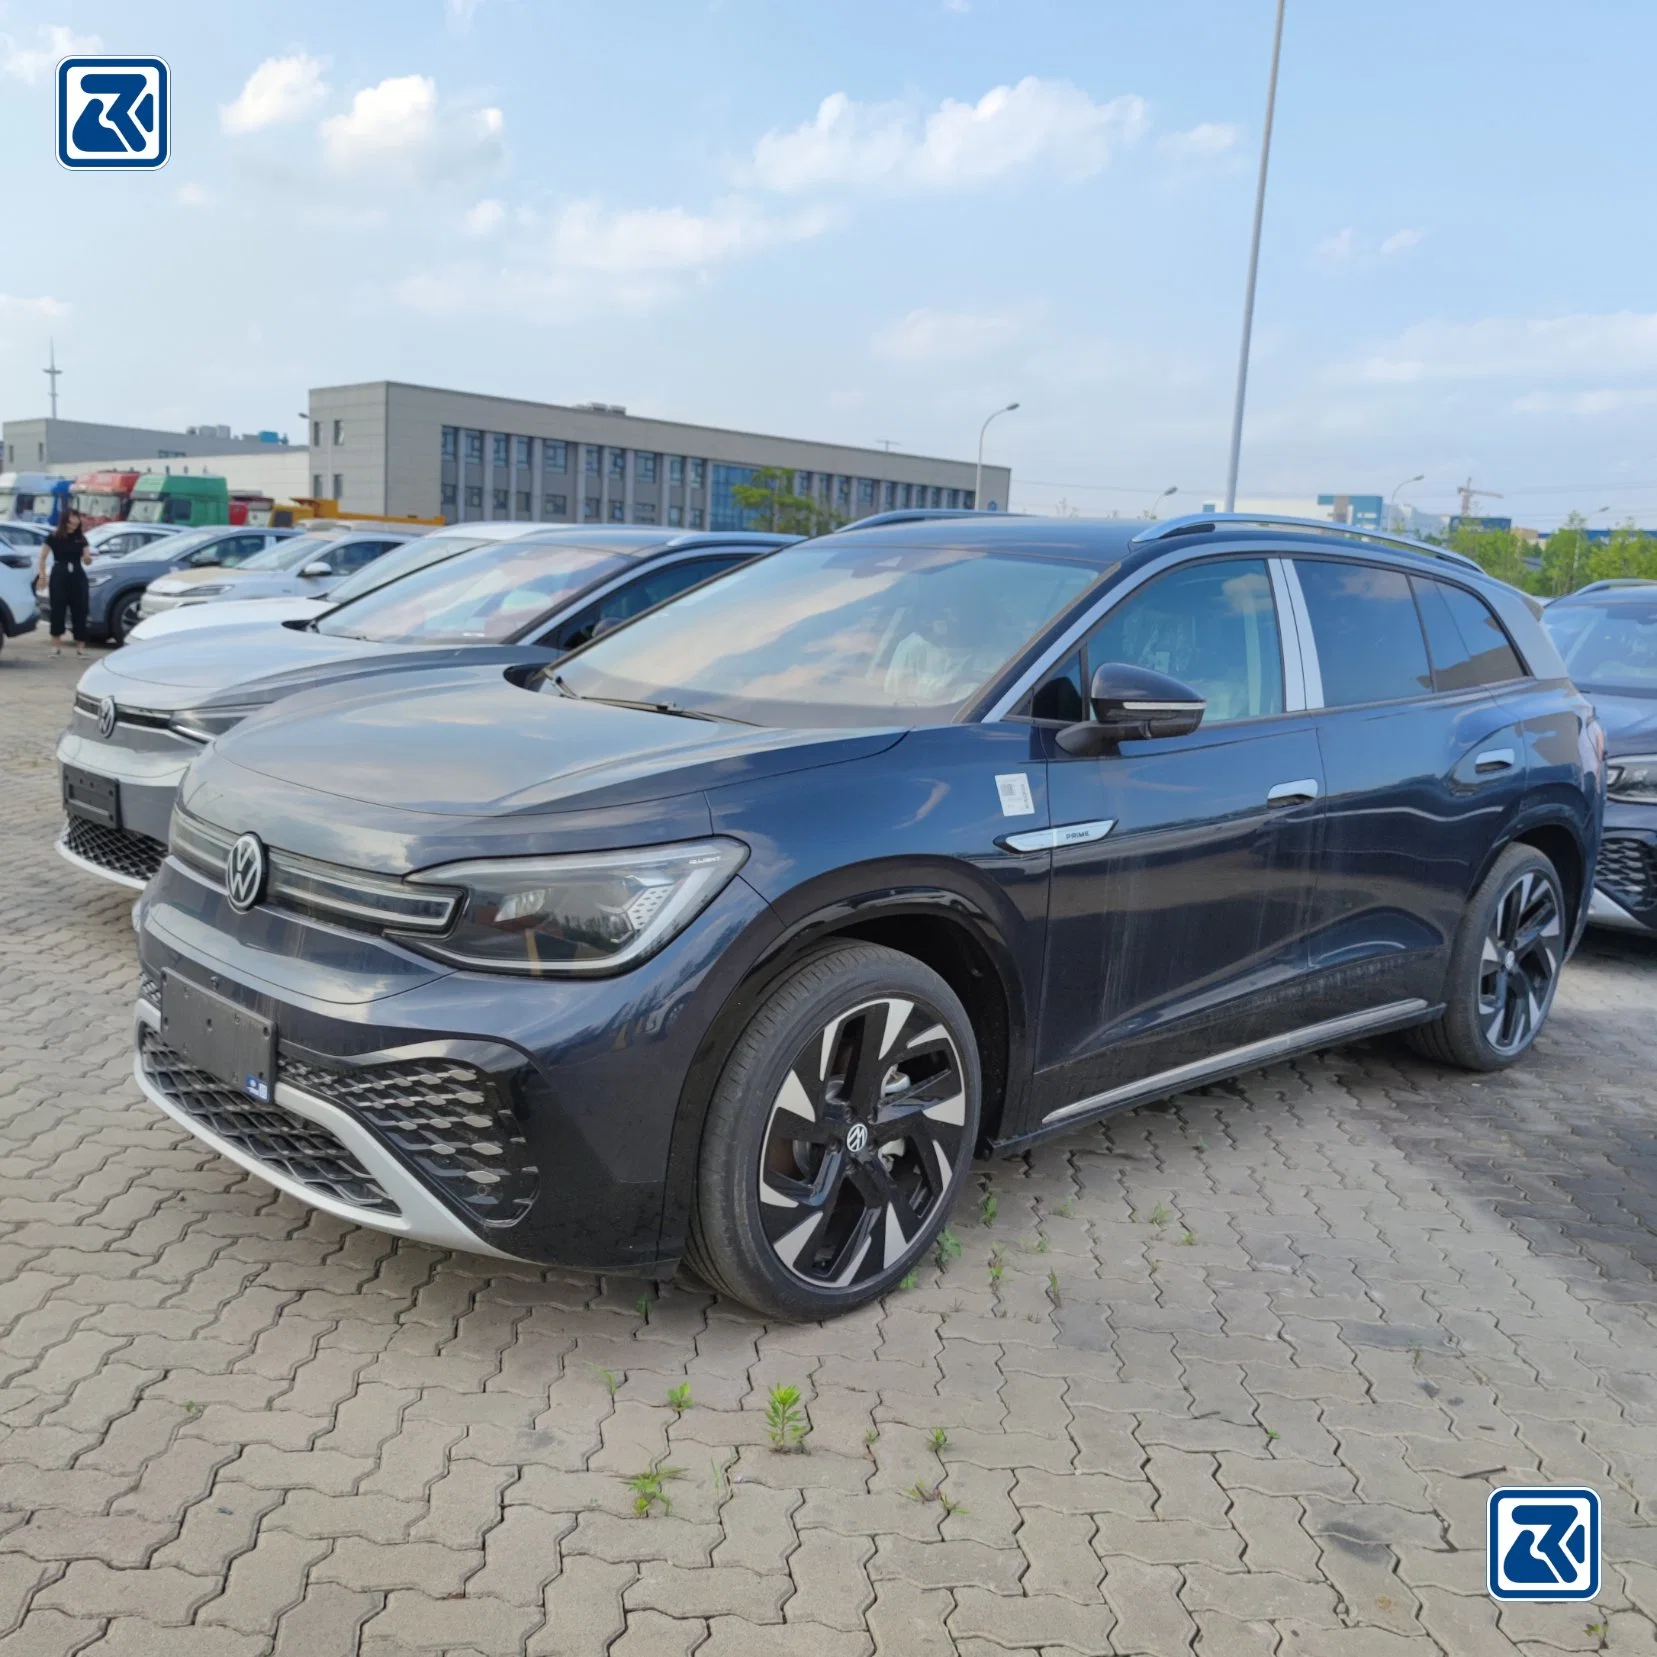 ID6; VW ID6 ID4 ID3 ID4X ID6X Crozz Used Volkswagen Car Whole Sale Smart New Electric SUV Electric Car with Long Power Life Battery in Stock